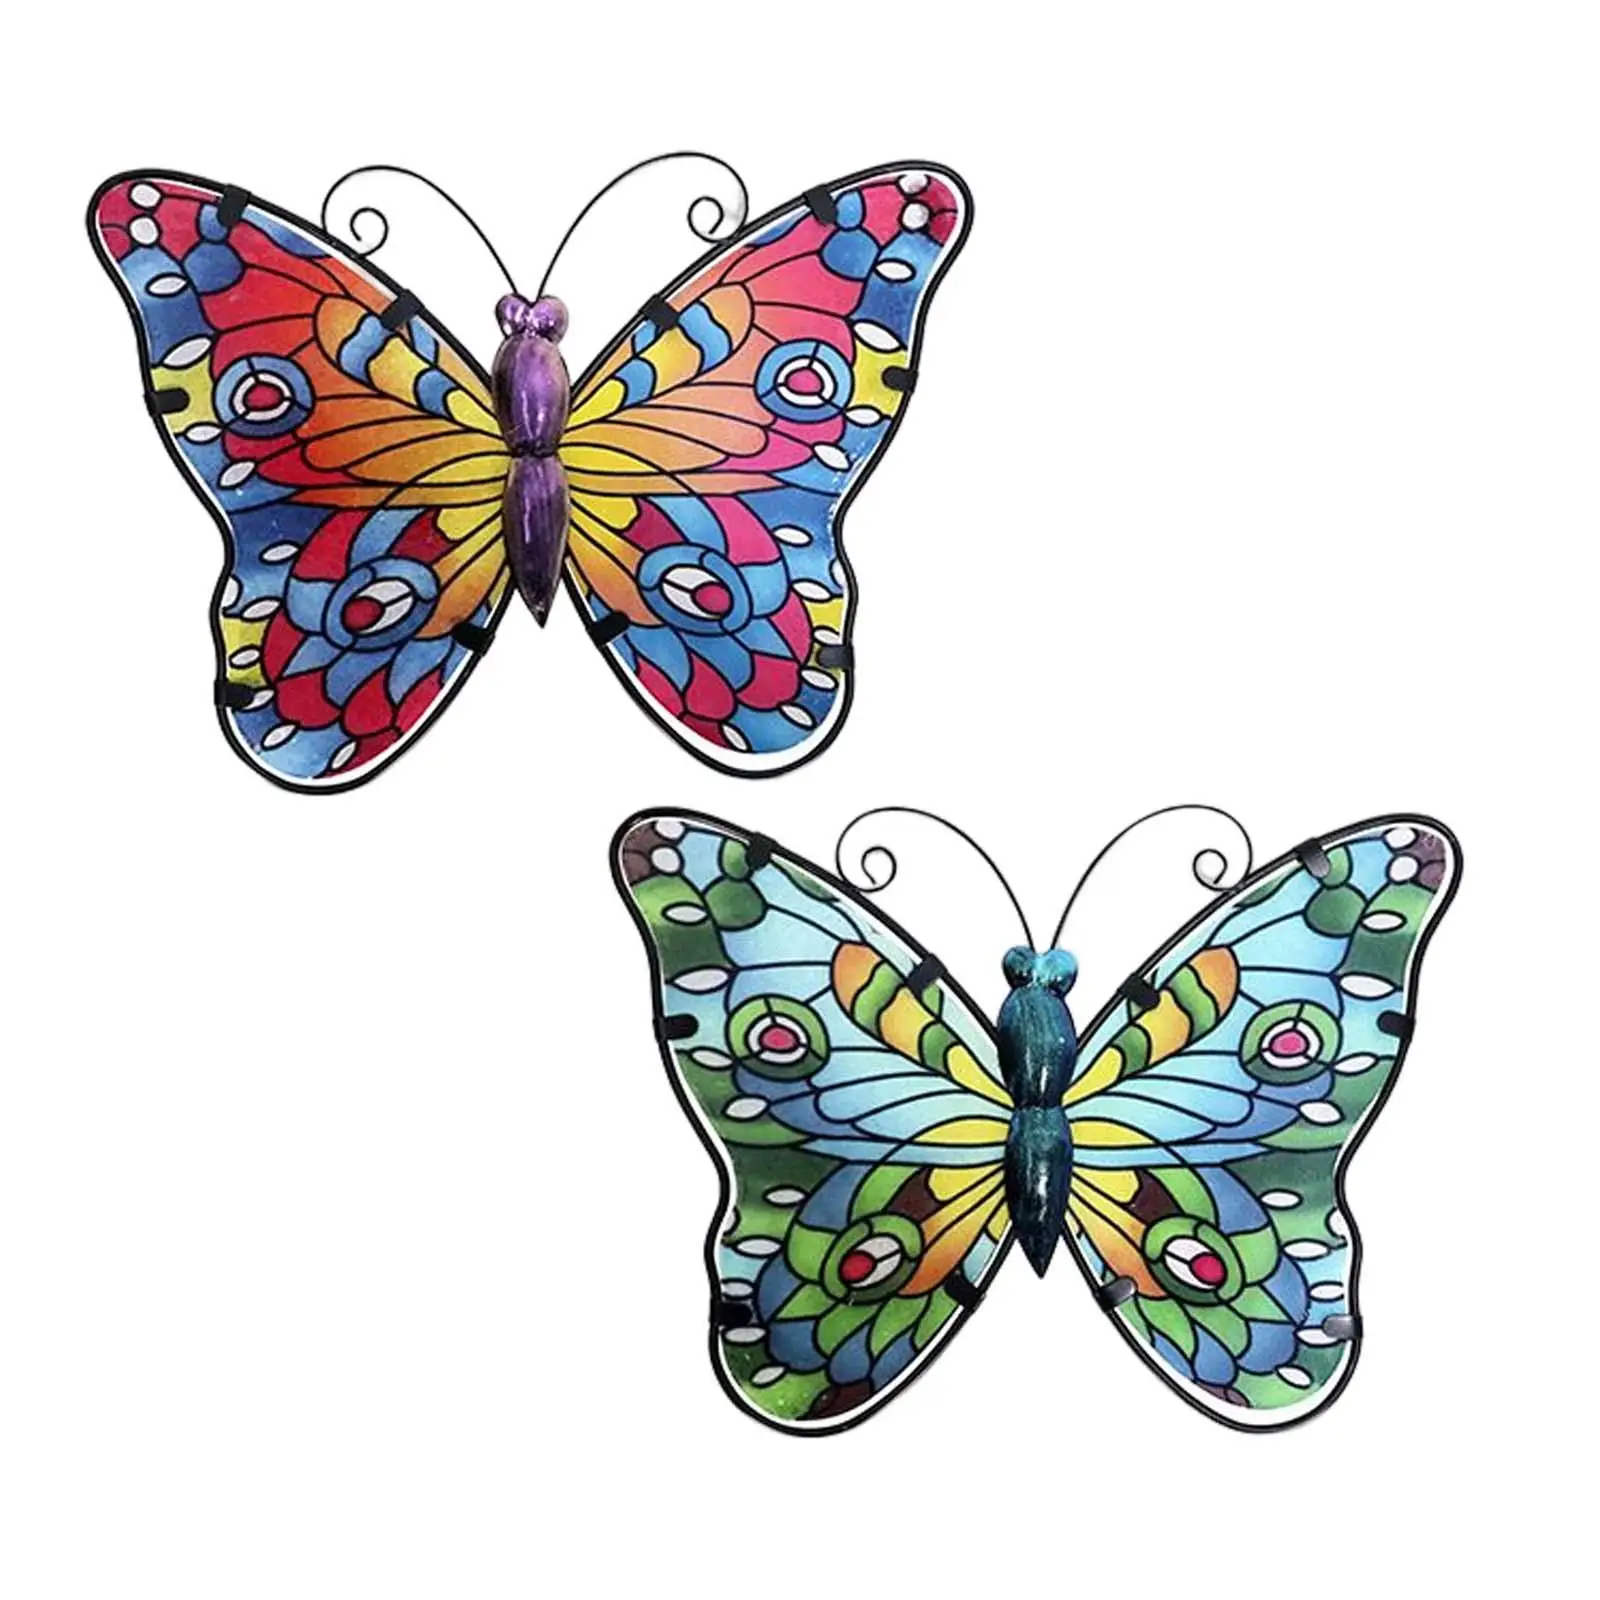 2x 3D Butterfly Ornaments Figurine Plaque Hanging Ornament Metal Wall Decor for Patio Home Indoor Decoration Bedroom